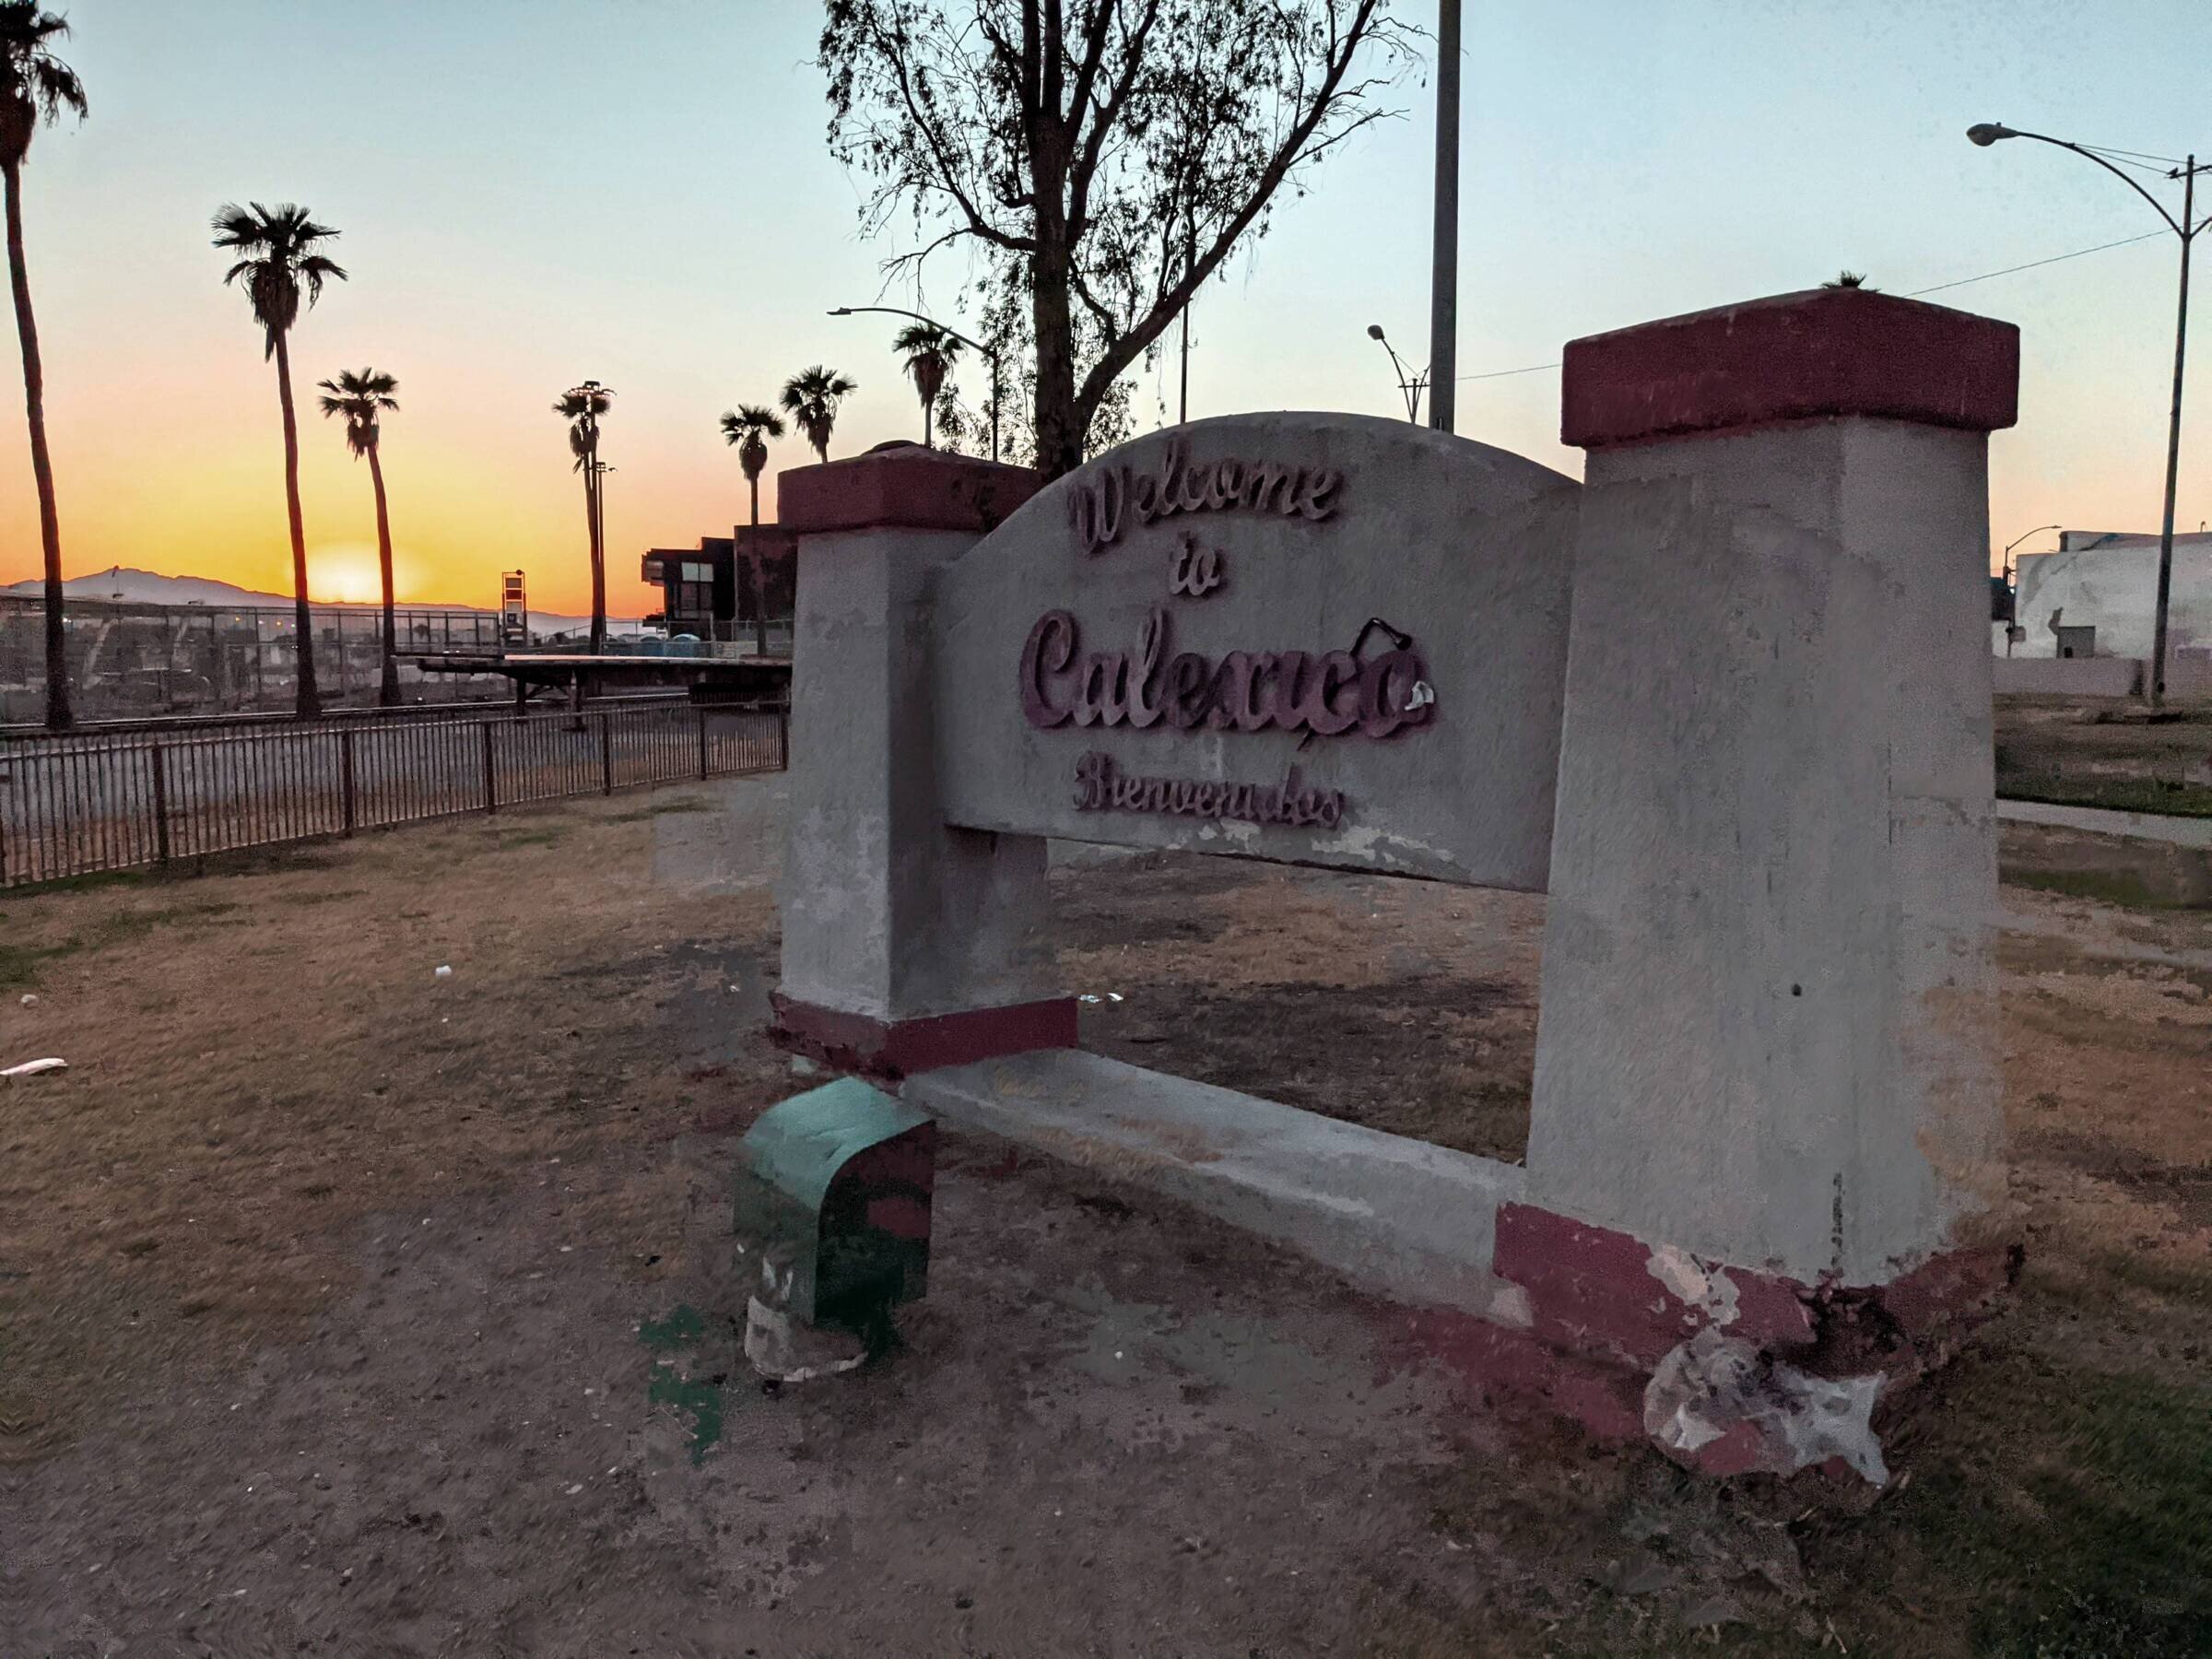 Calexico-Sign-Border-Fence-at-Sunset.jpg